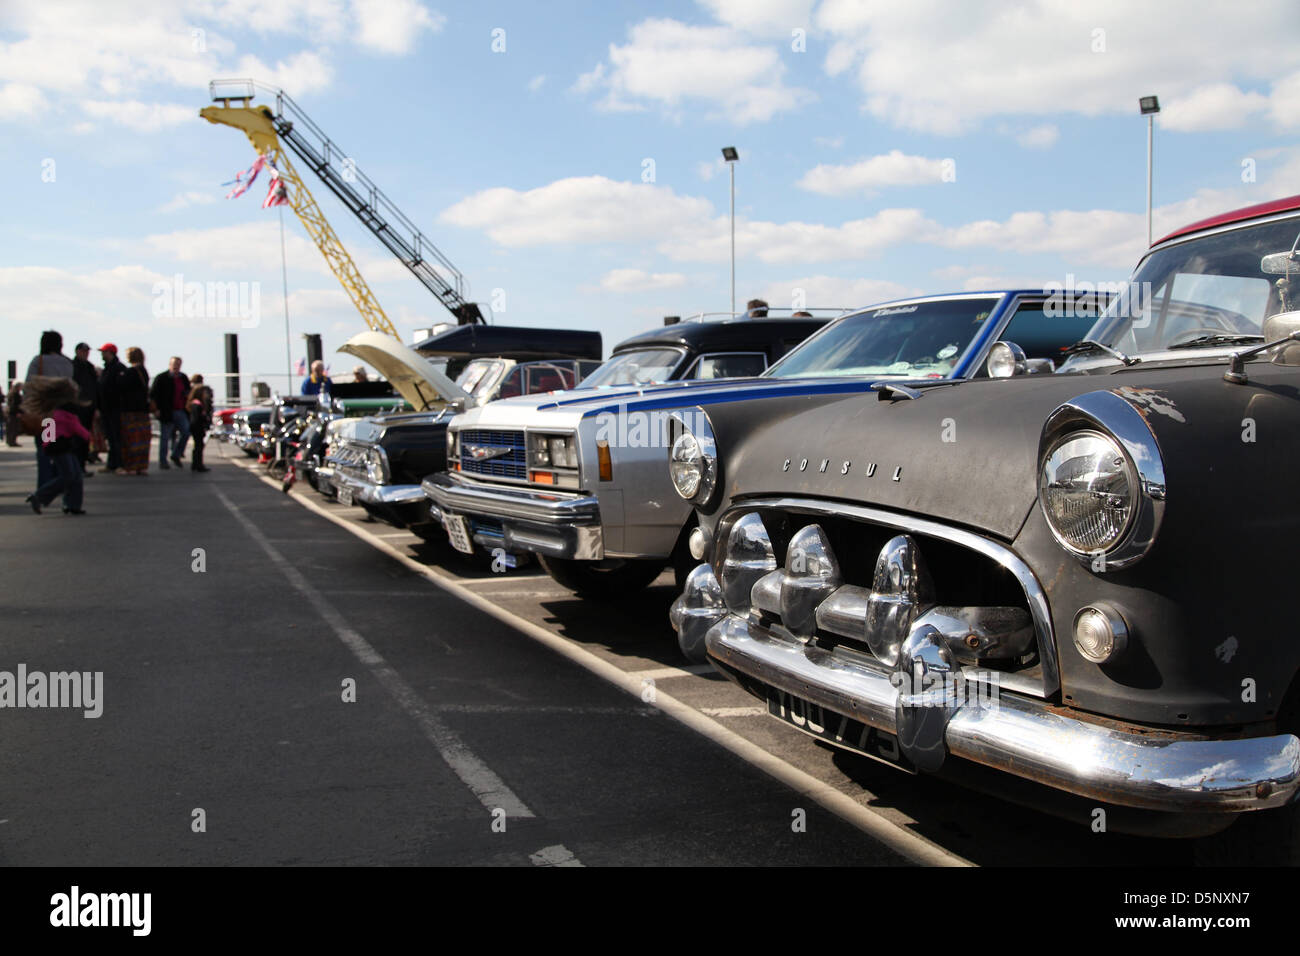 Ryde, Isle of Wight, UK. 6th April 2013 Classic cars on display at Ryde Pier Head on the Isle of Wight. Spring weather was on display today after a poor start to the season. Credit: Rob Arnold/Alamy Live News Stock Photo